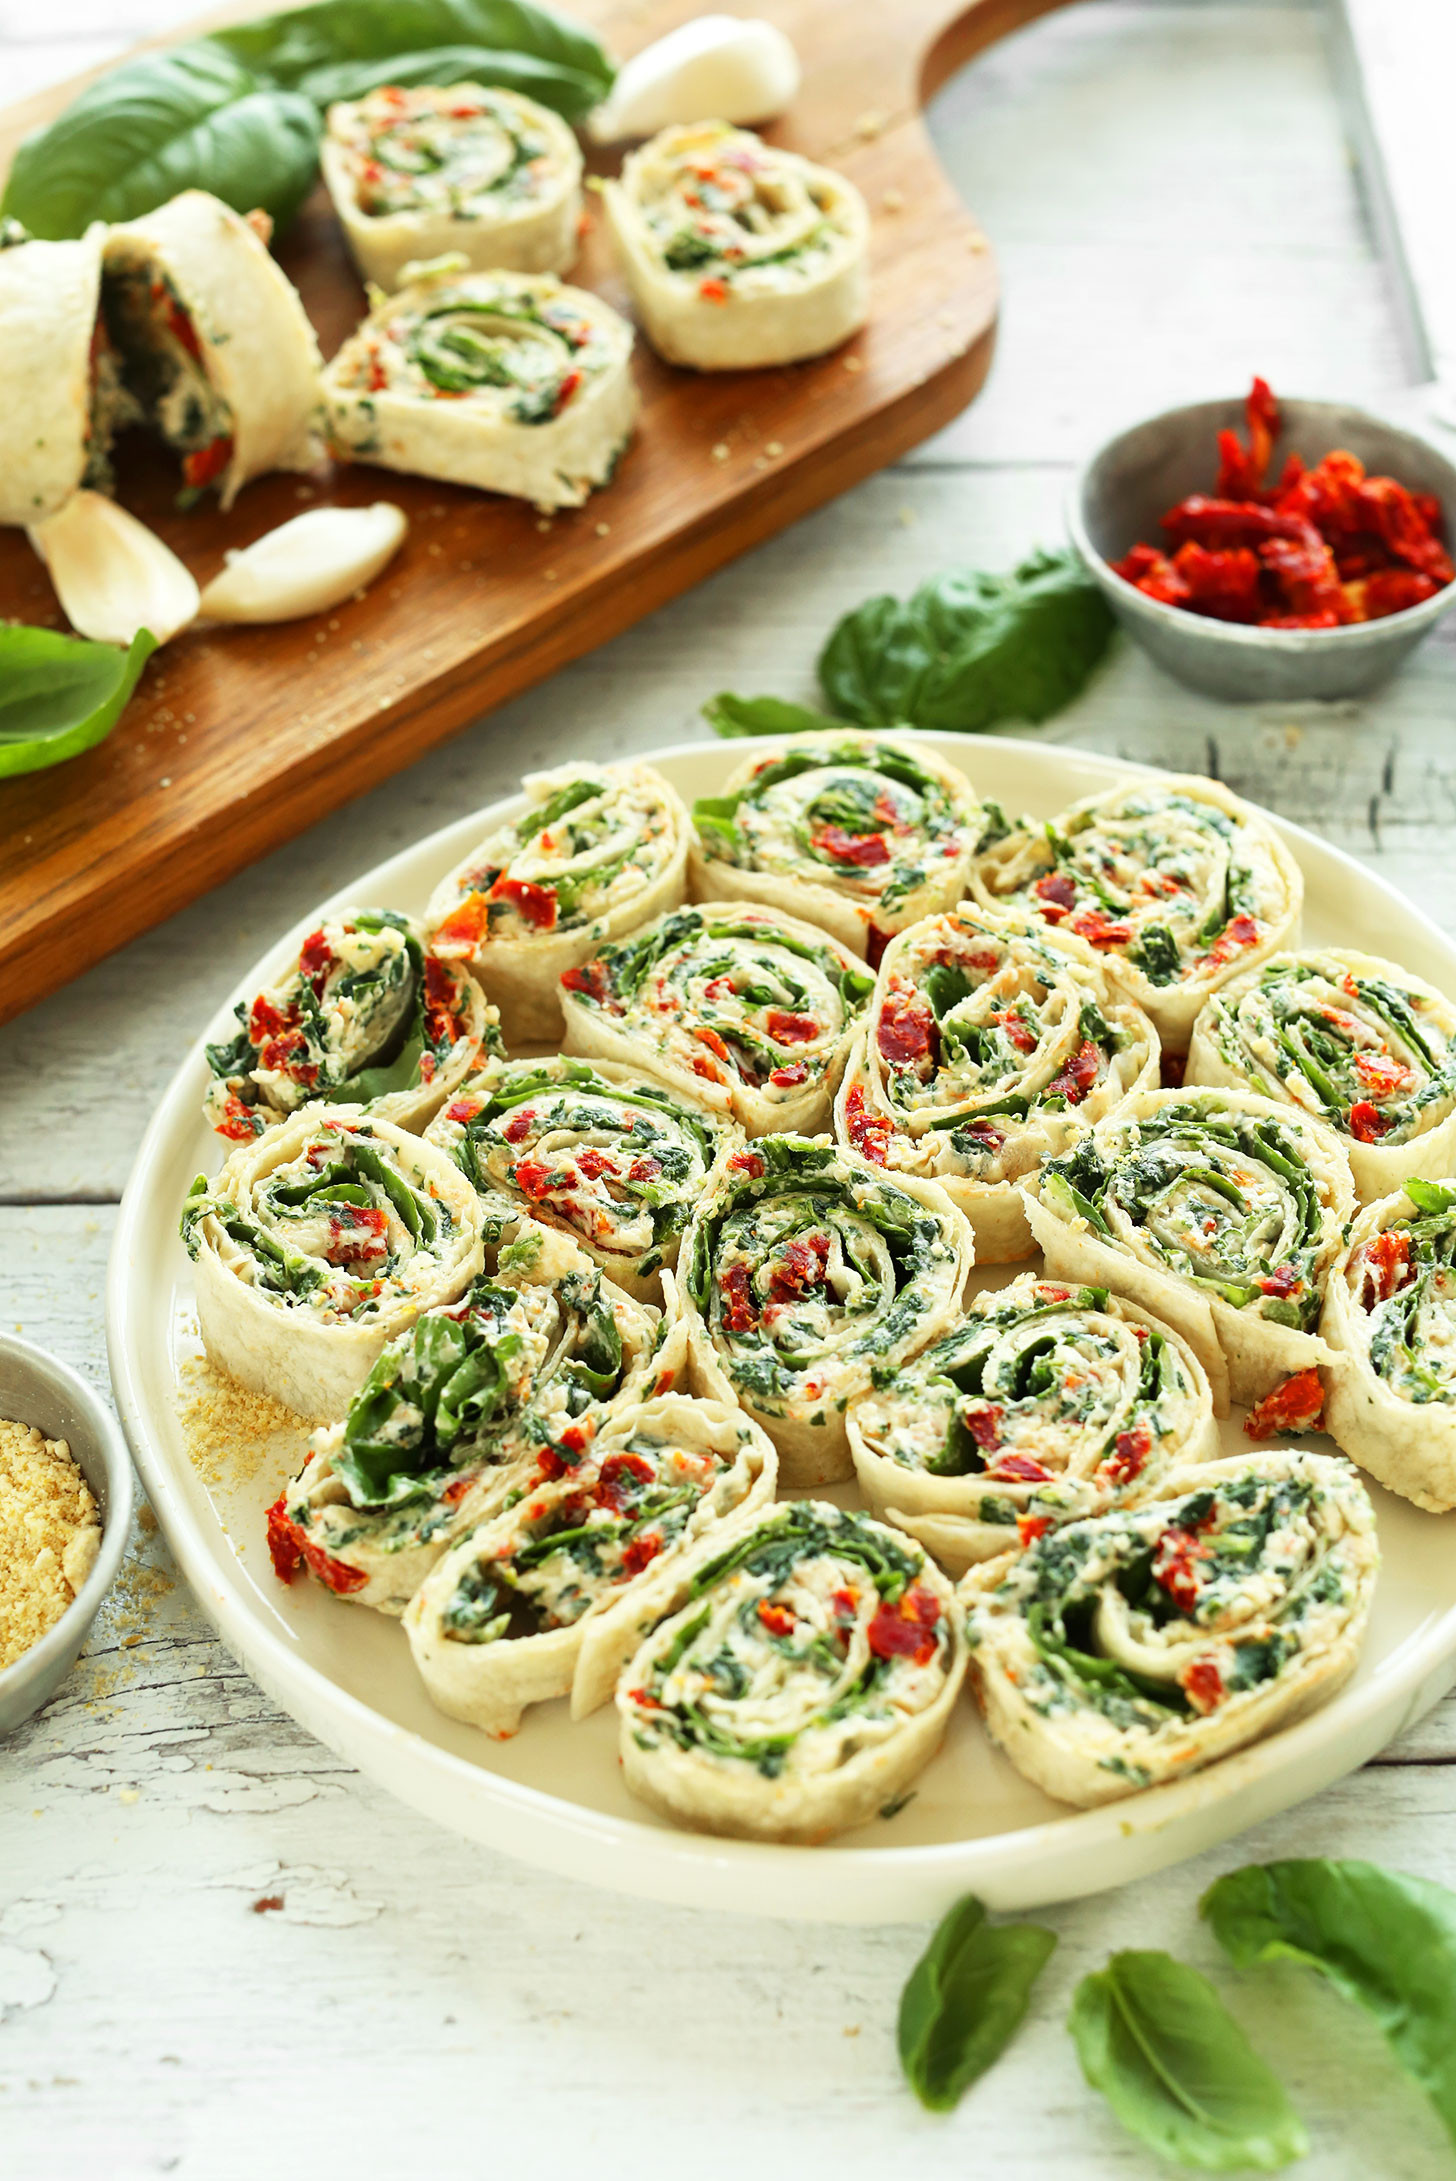 30 Of the Best Ideas for Vegetarian Appetizers Finger Food - Best ...